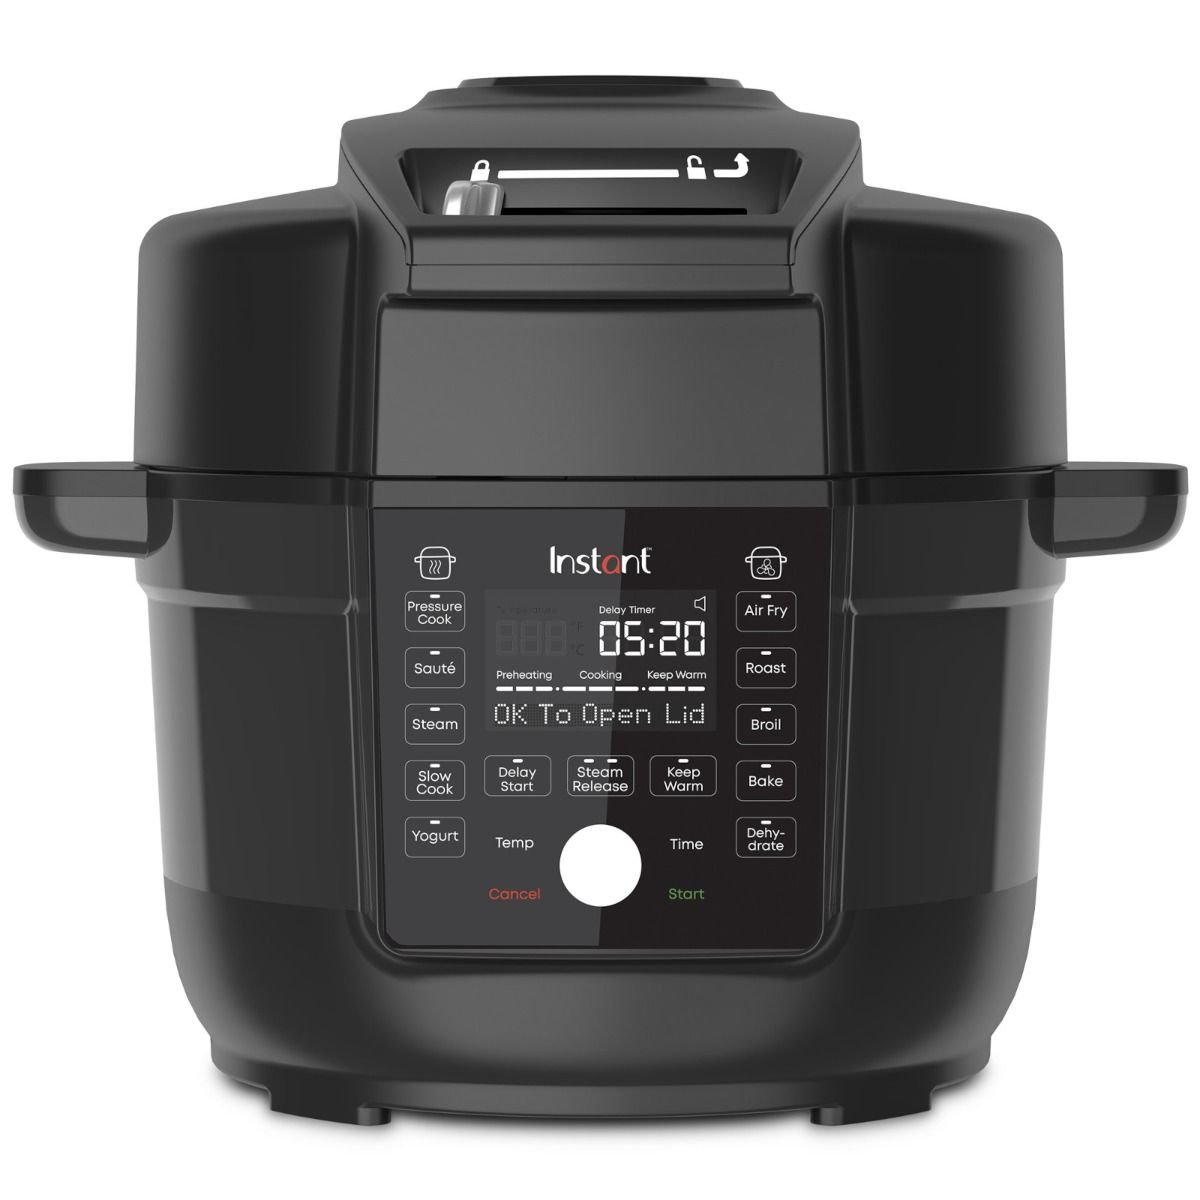 CHEF iQ Smart Pressure Cooker 10 Cooking Functions & 18 Features